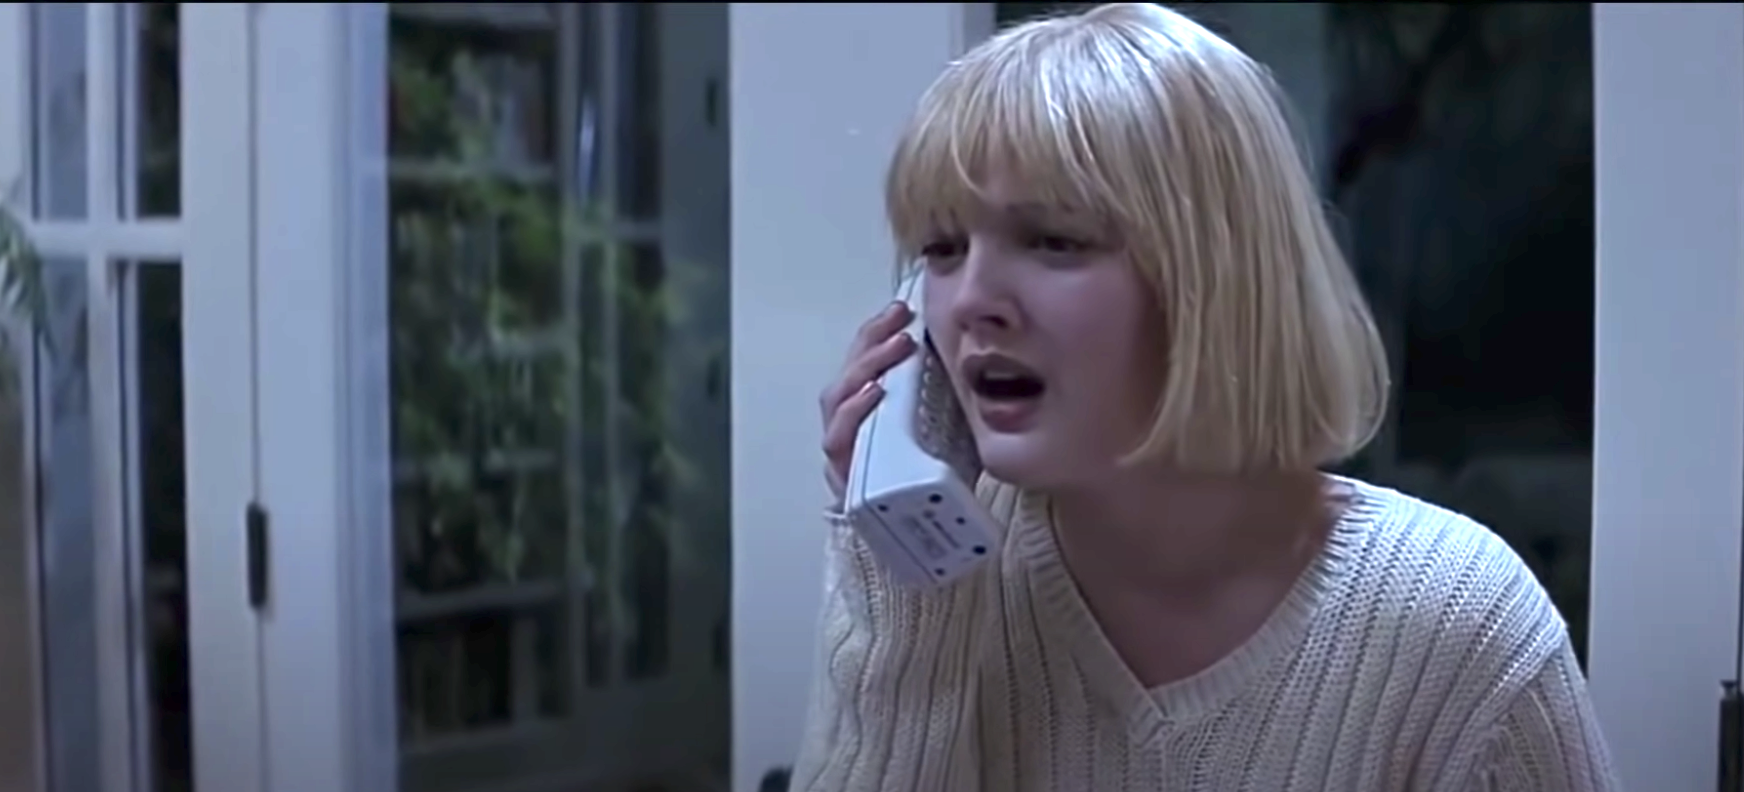 Drew Barrymore in Scream with a blonde bob haircut and a large cordless house phone to her ear